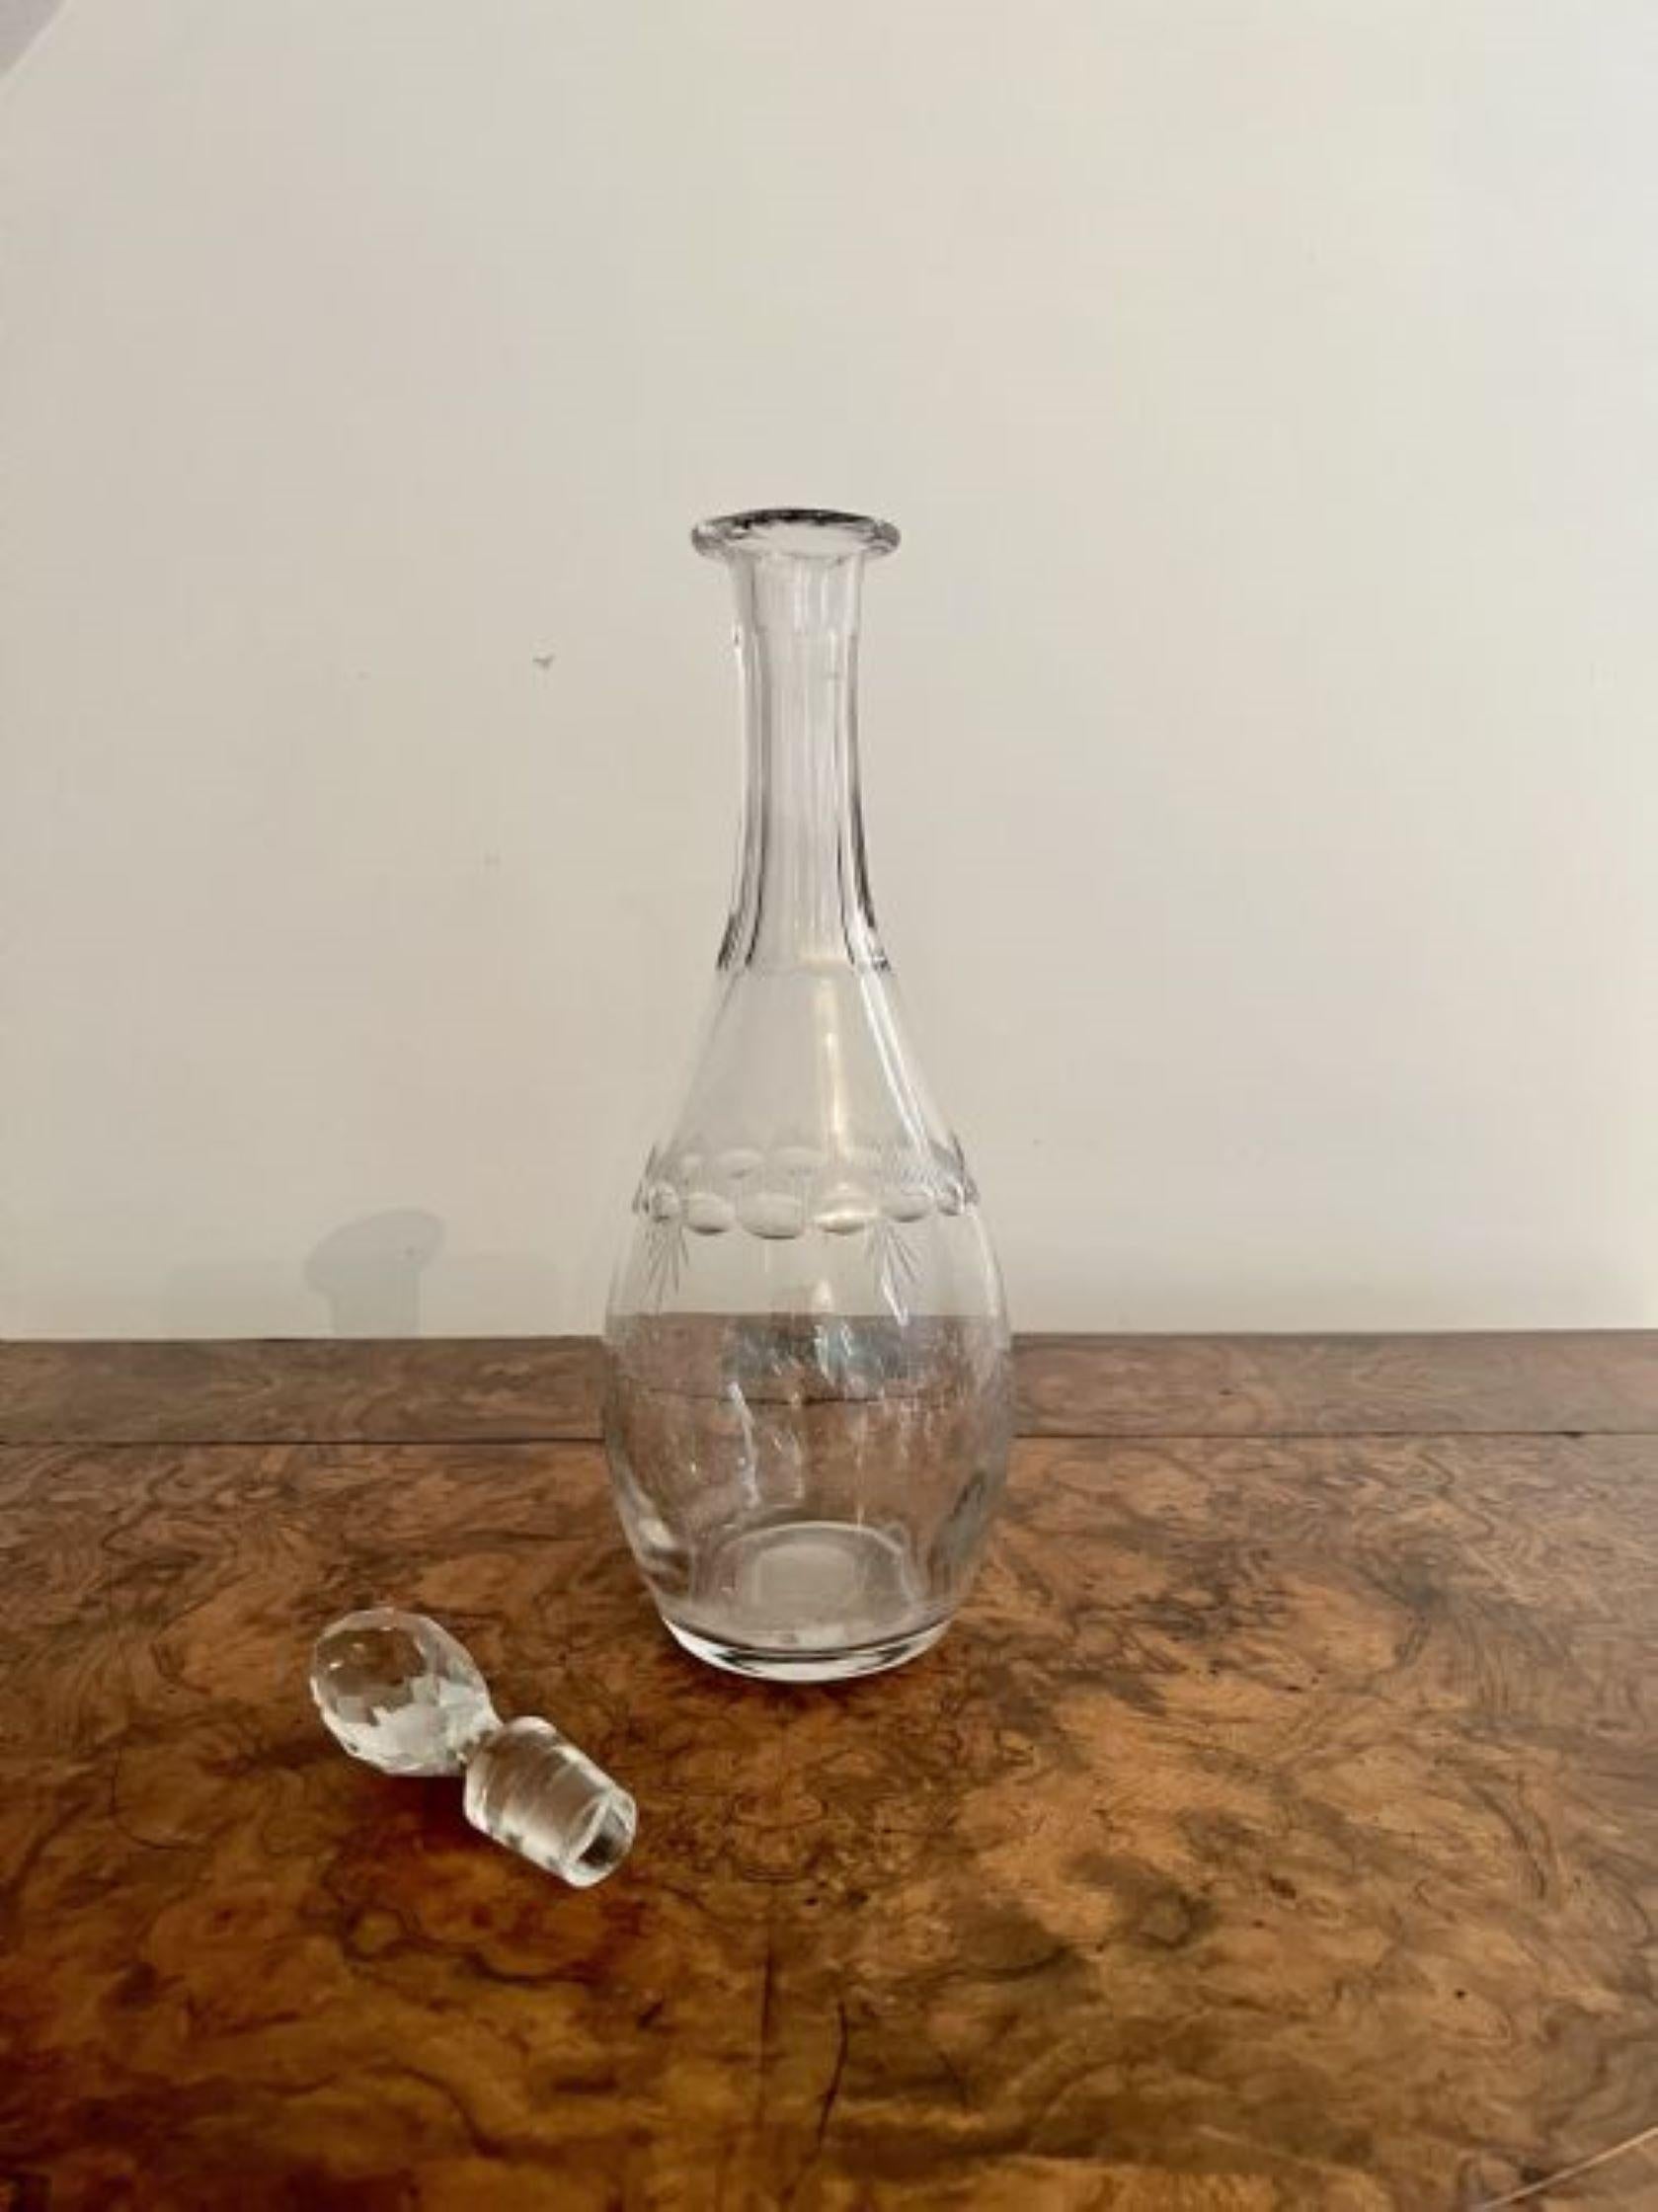 Quality antique Edwardian glass decanter having a quality antique Edwardian decanter engraved to the body with the original cut glass stopper.